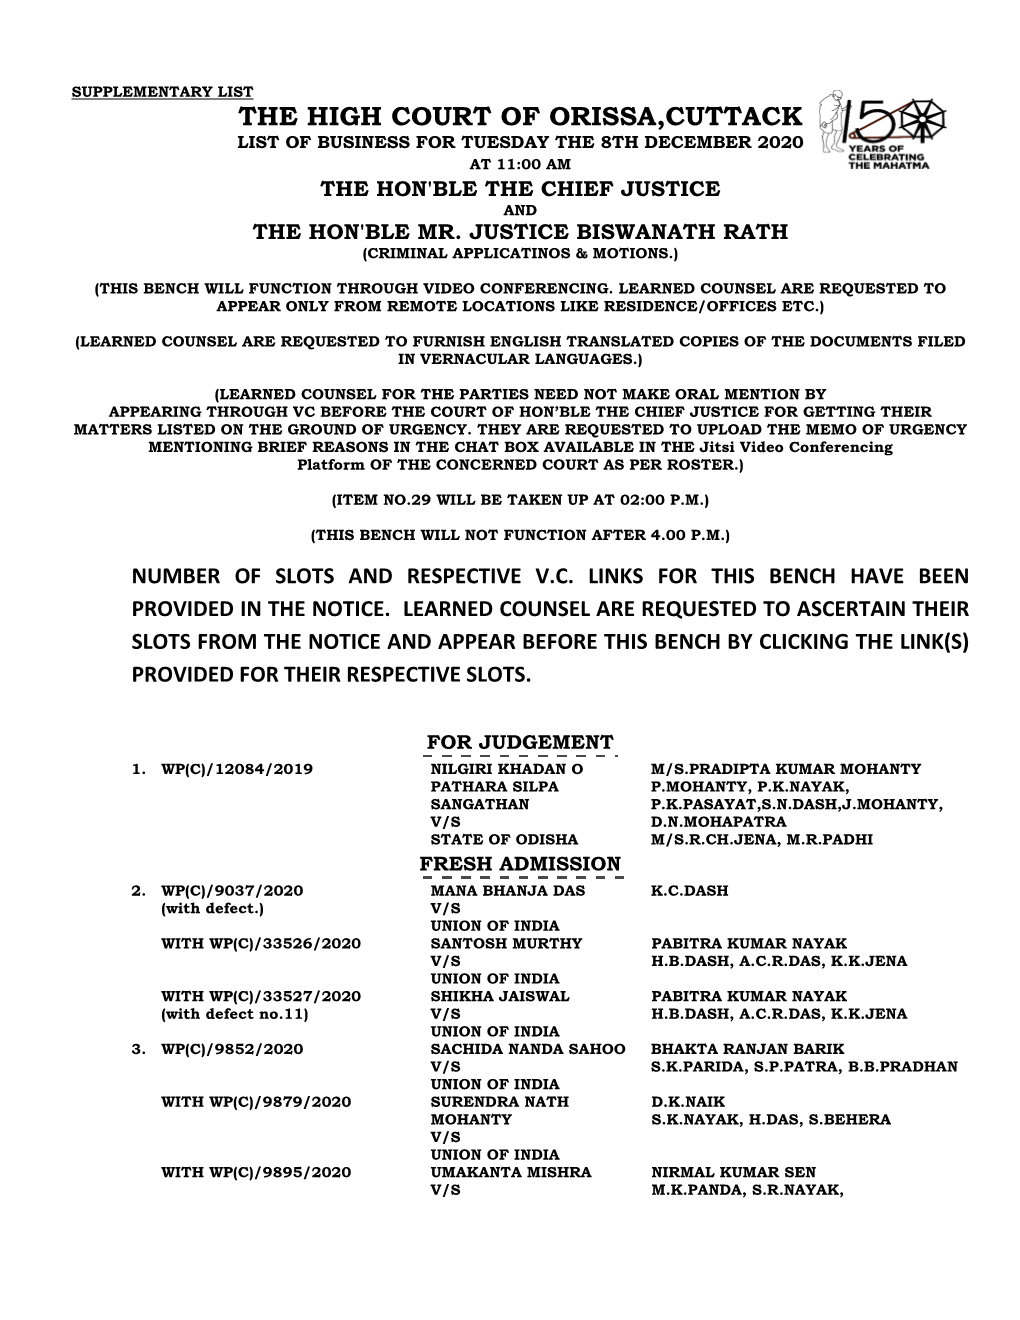 The High Court of Orissa,Cuttack List of Business for Tuesday the 8Th December 2020